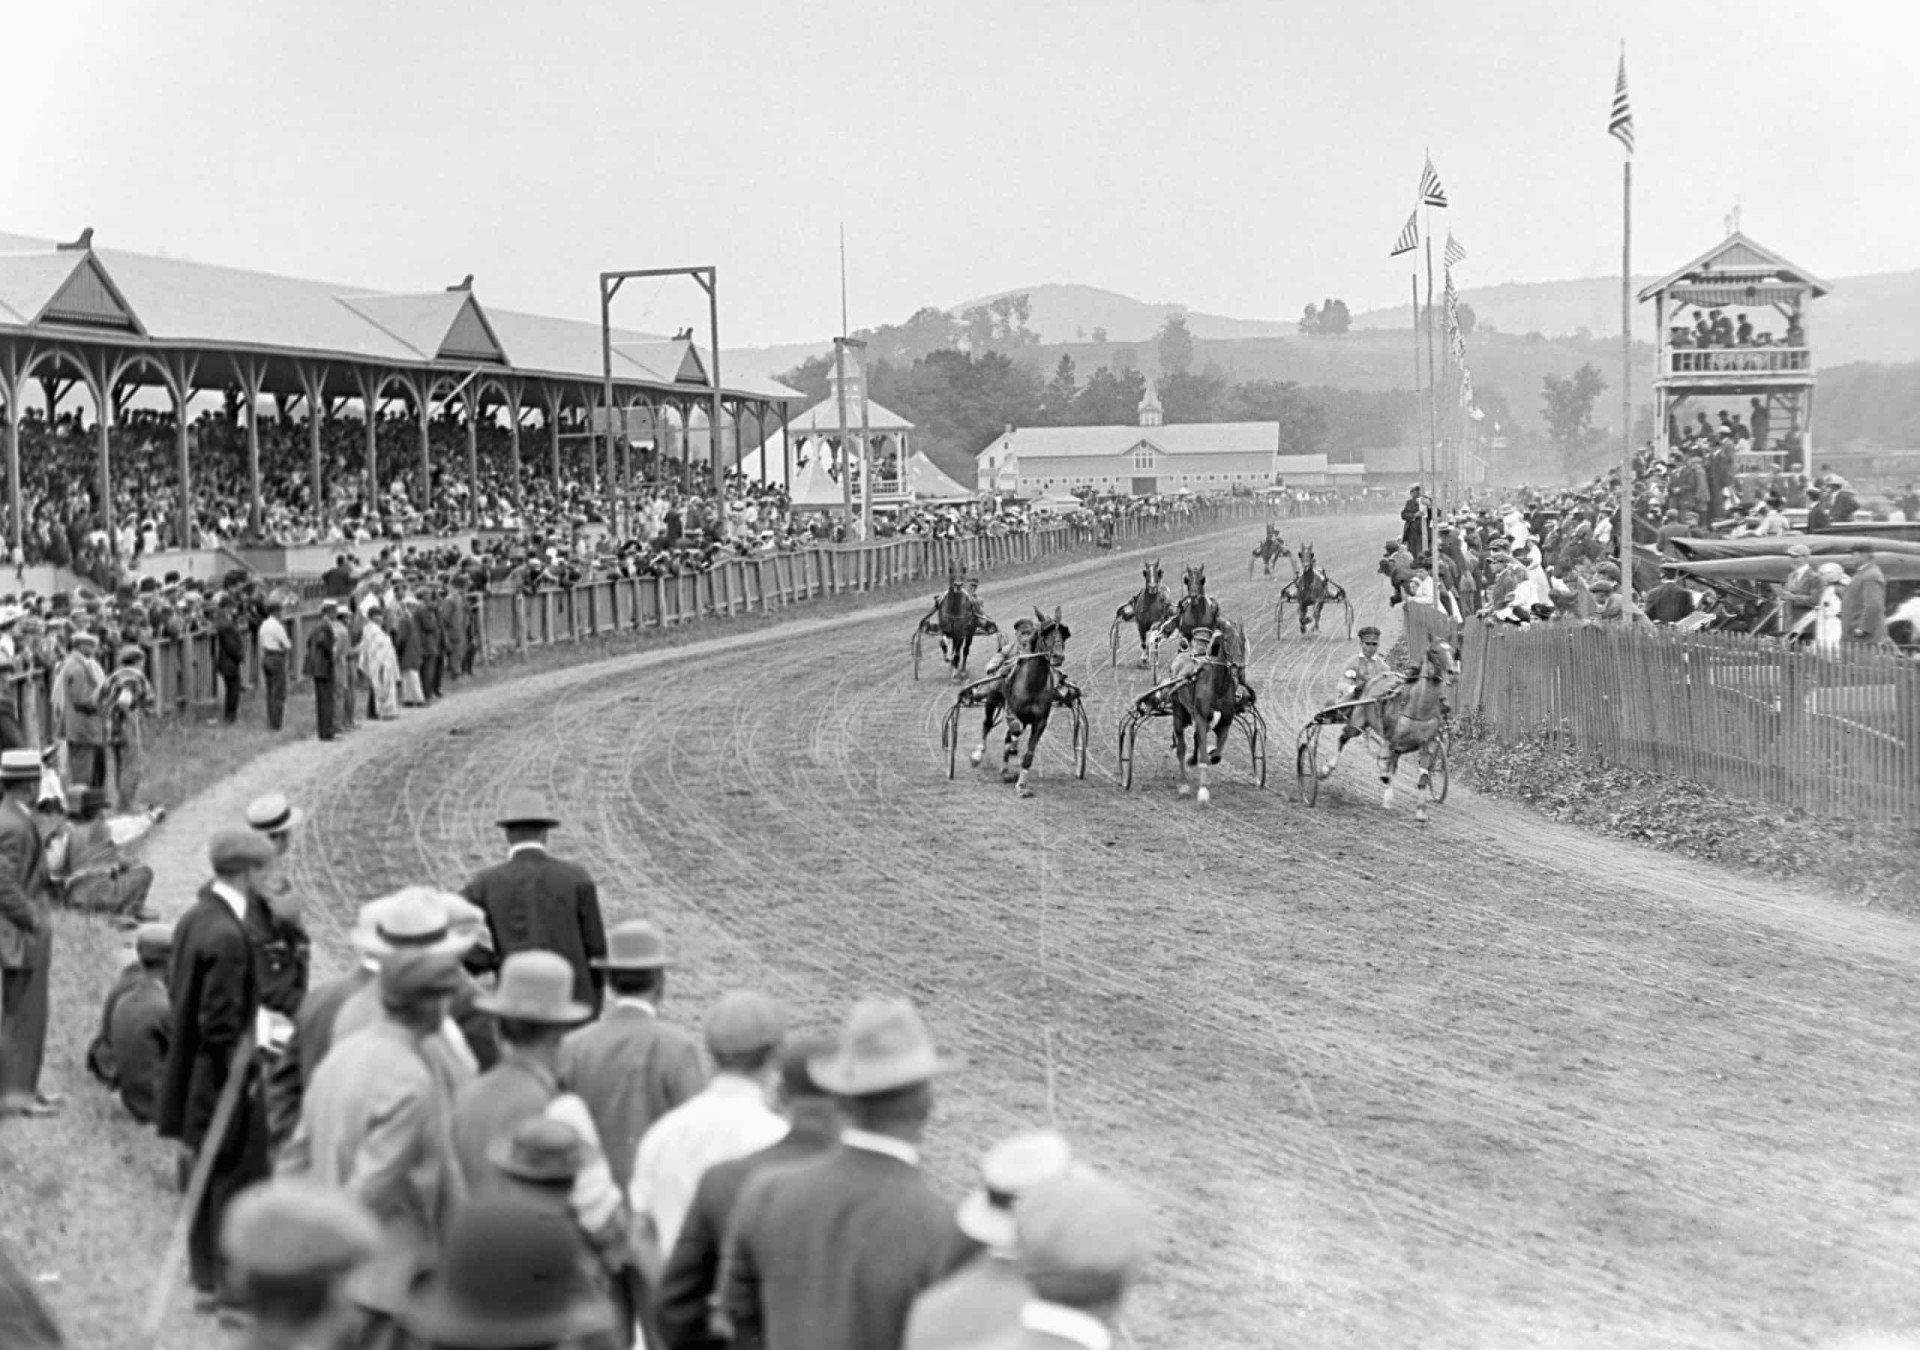 <p>Harness racing, in which a horse pulls a two-wheeled cart called a sulky occupied by a driver, became popular in the early 20th century. It remains a huge sport in France and the United States.</p><p><a href="https://www.msn.com/en-us/community/channel/vid-7xx8mnucu55yw63we9va2gwr7uihbxwc68fxqp25x6tg4ftibpra?cvid=94631541bc0f4f89bfd59158d696ad7e">Follow us and access great exclusive content every day</a></p>